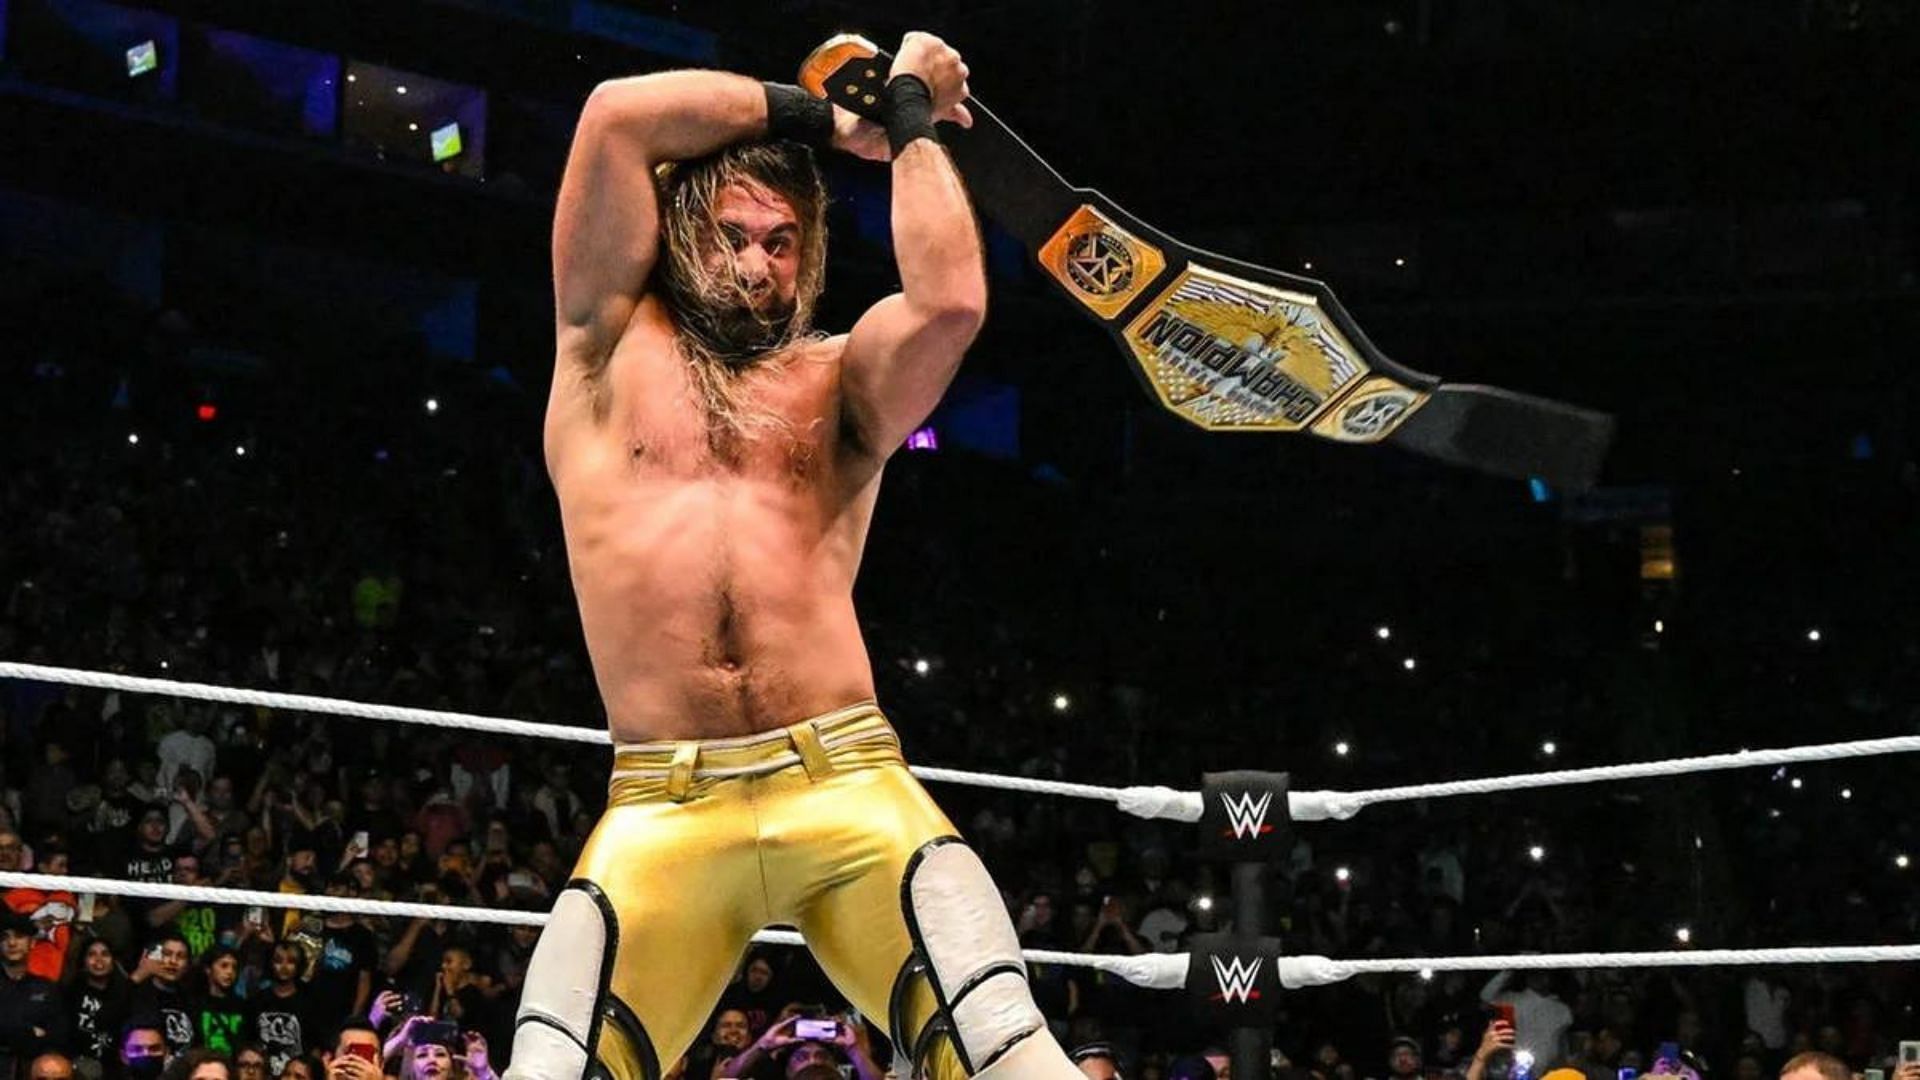 Seth Rollins is the current WWE US Champion